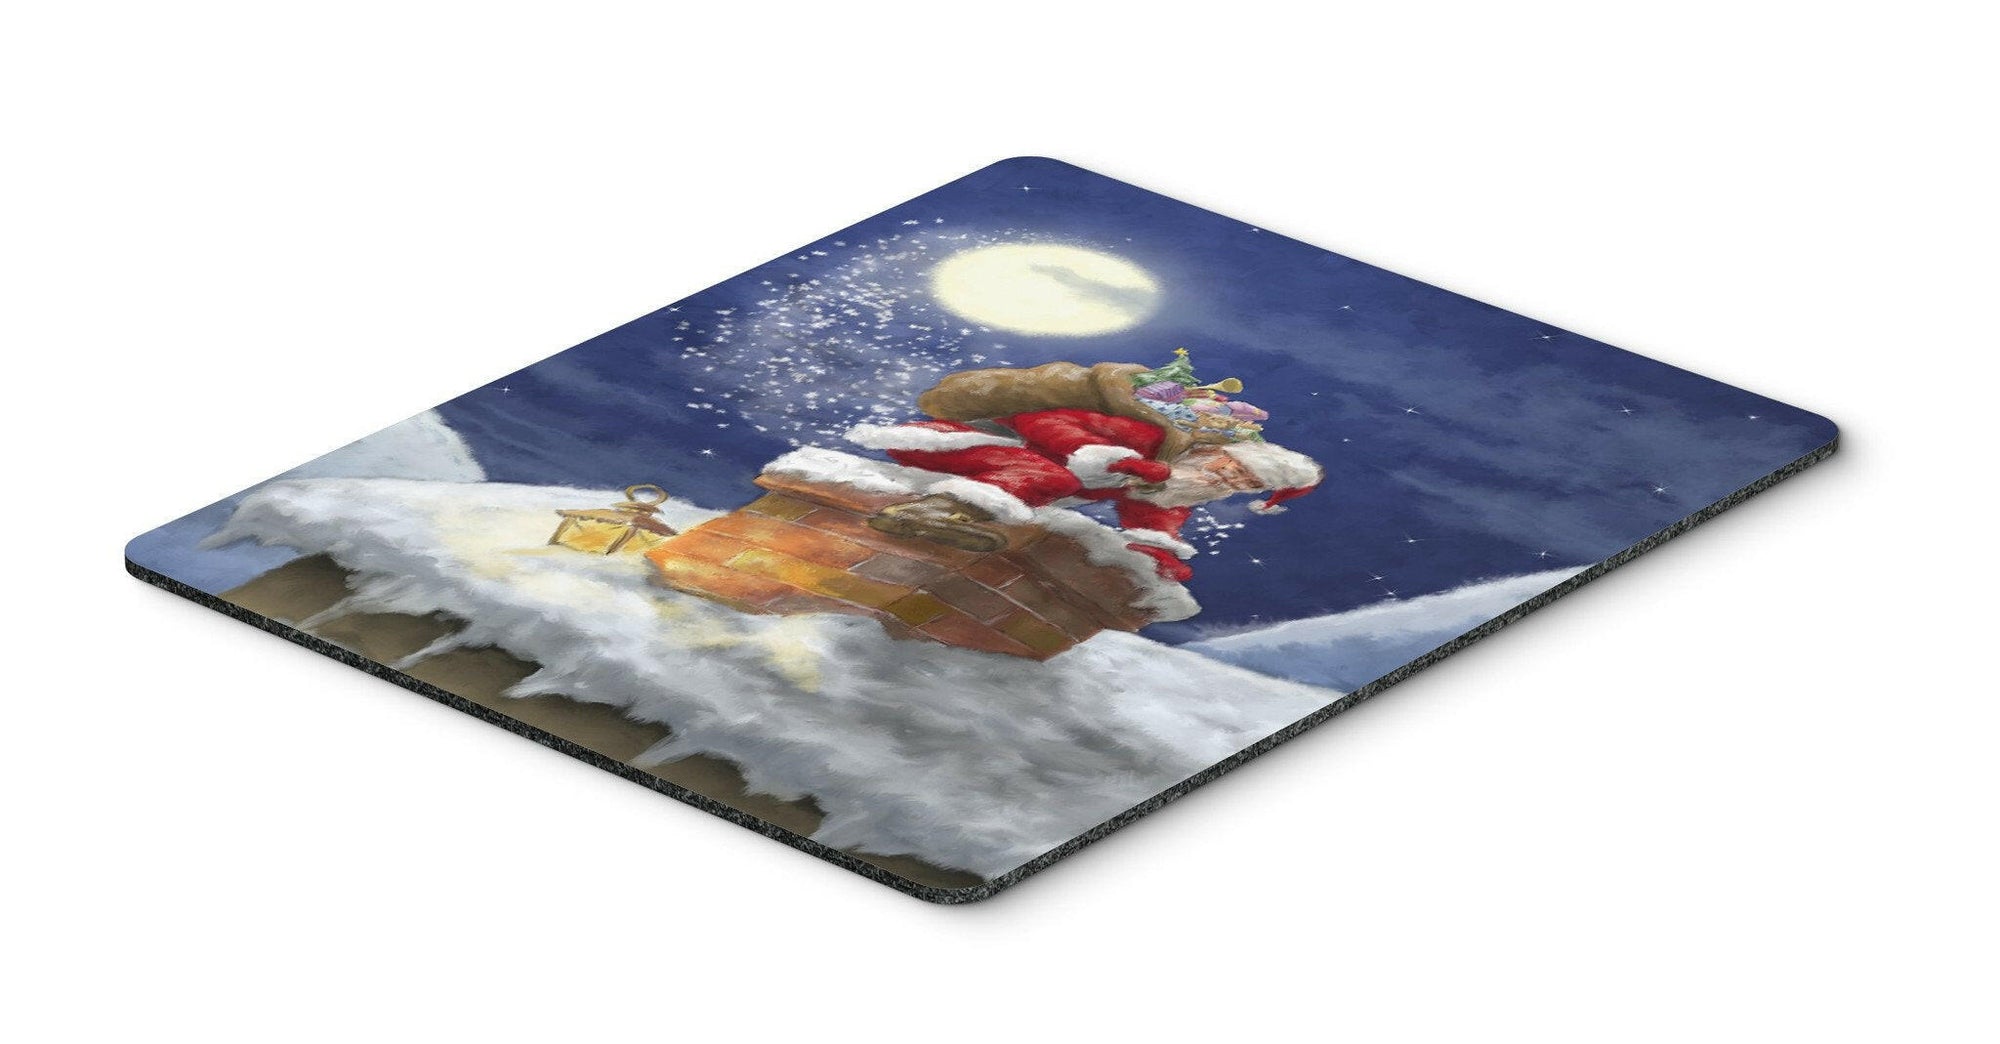 Christmas Santa Claus in the Chimney Mouse Pad, Hot Pad or Trivet APH5479MP by Caroline's Treasures